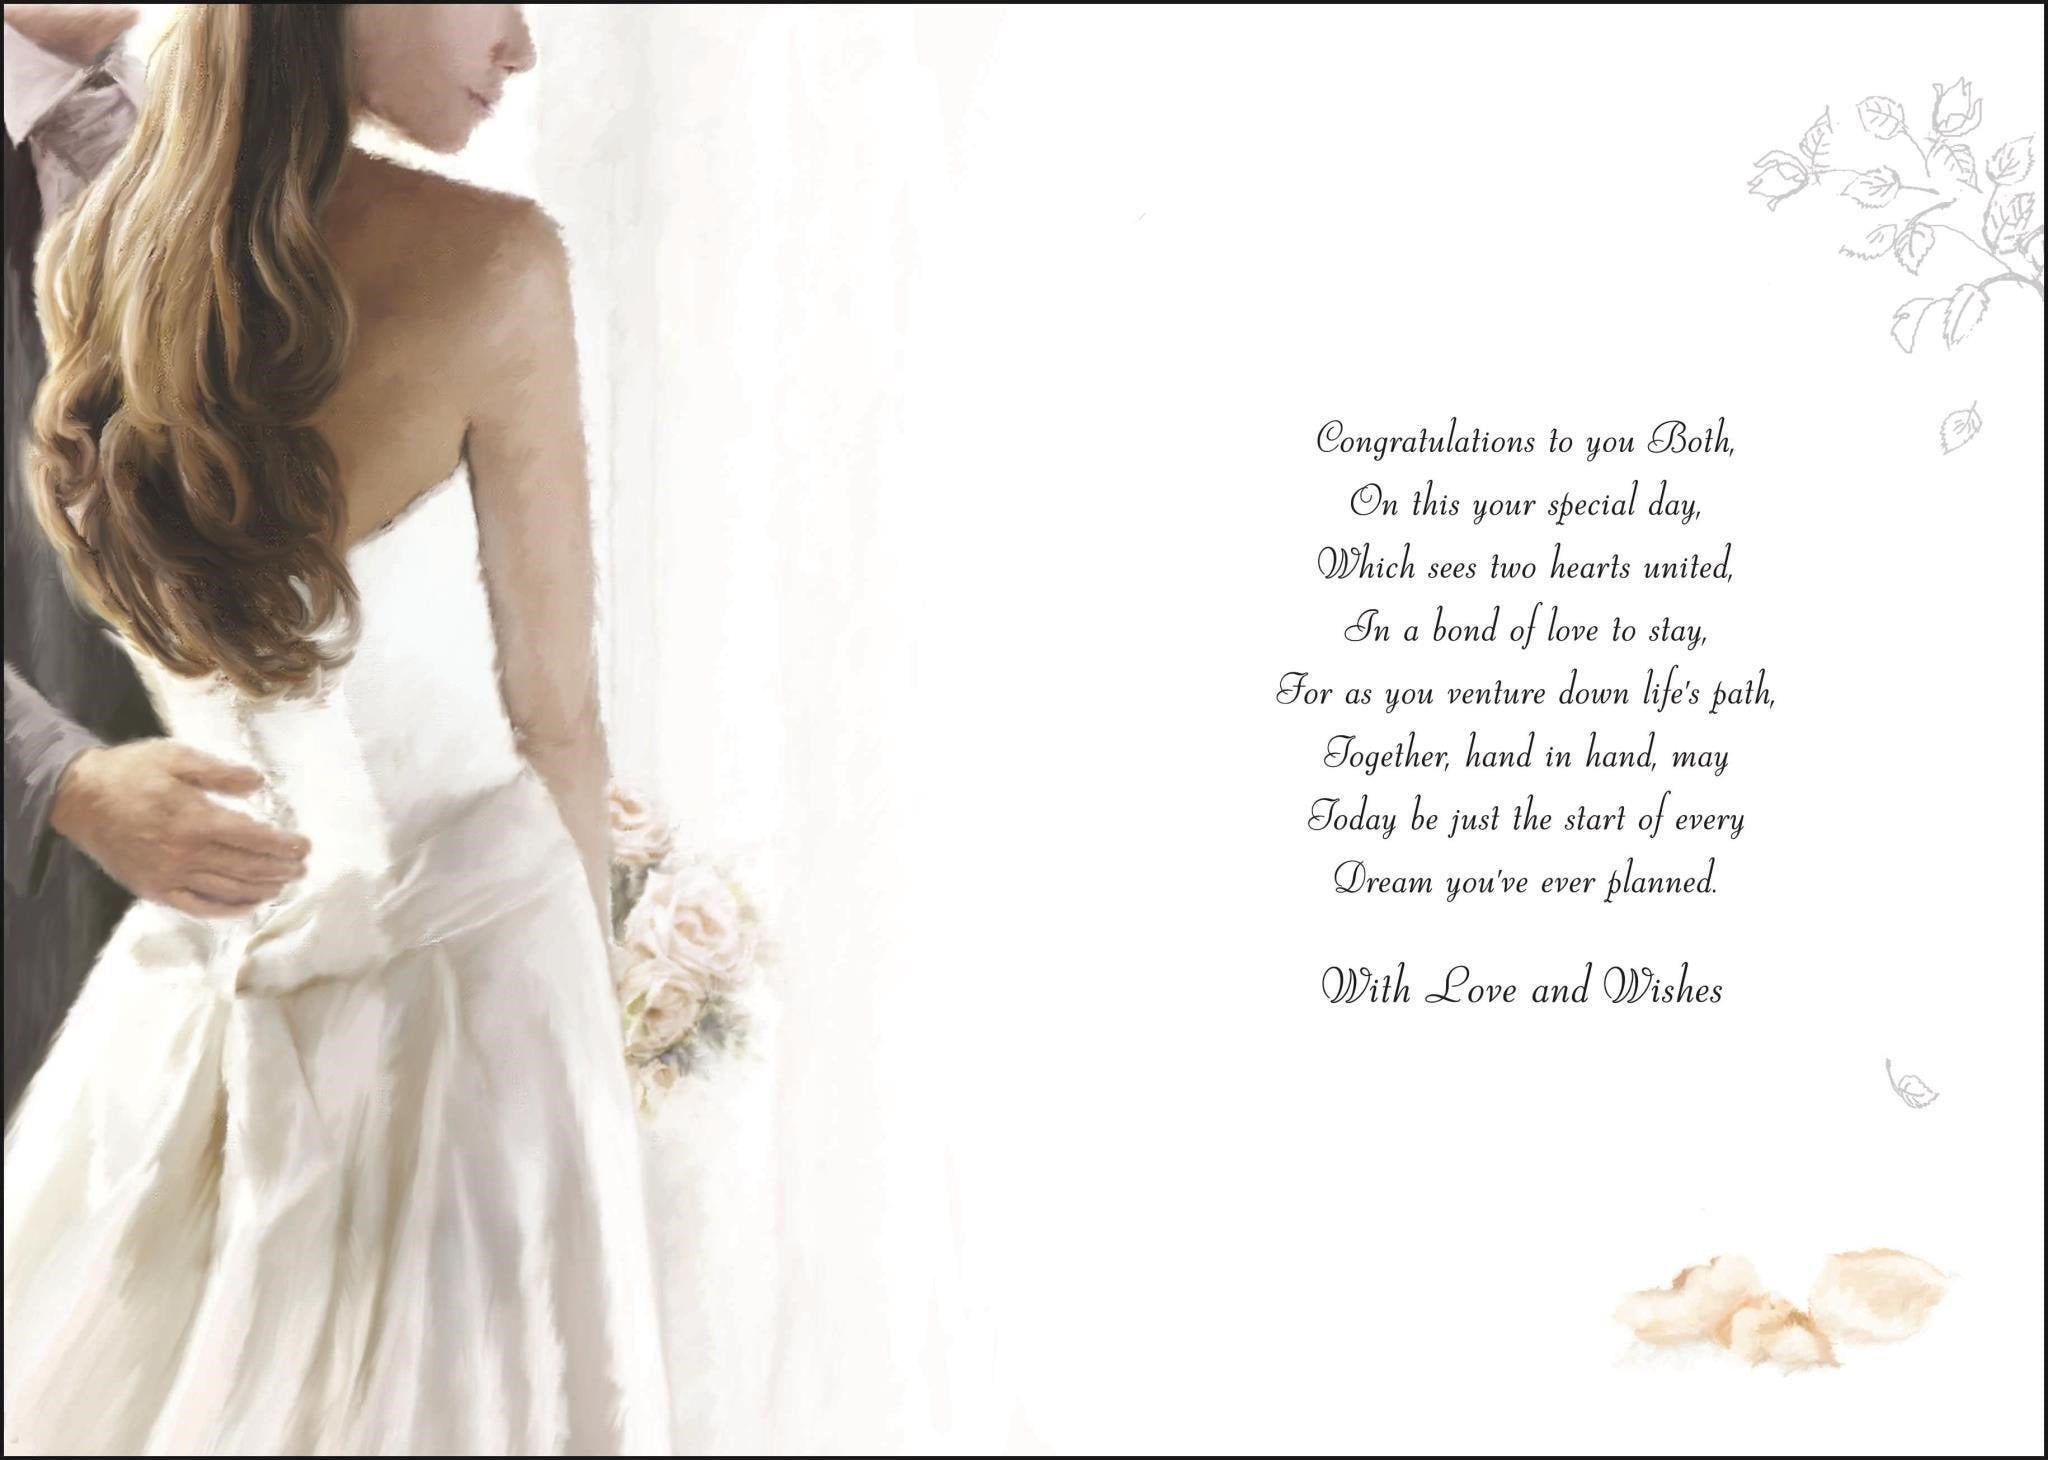 Inside of Wedding Day Wishes to Both Greetings Card